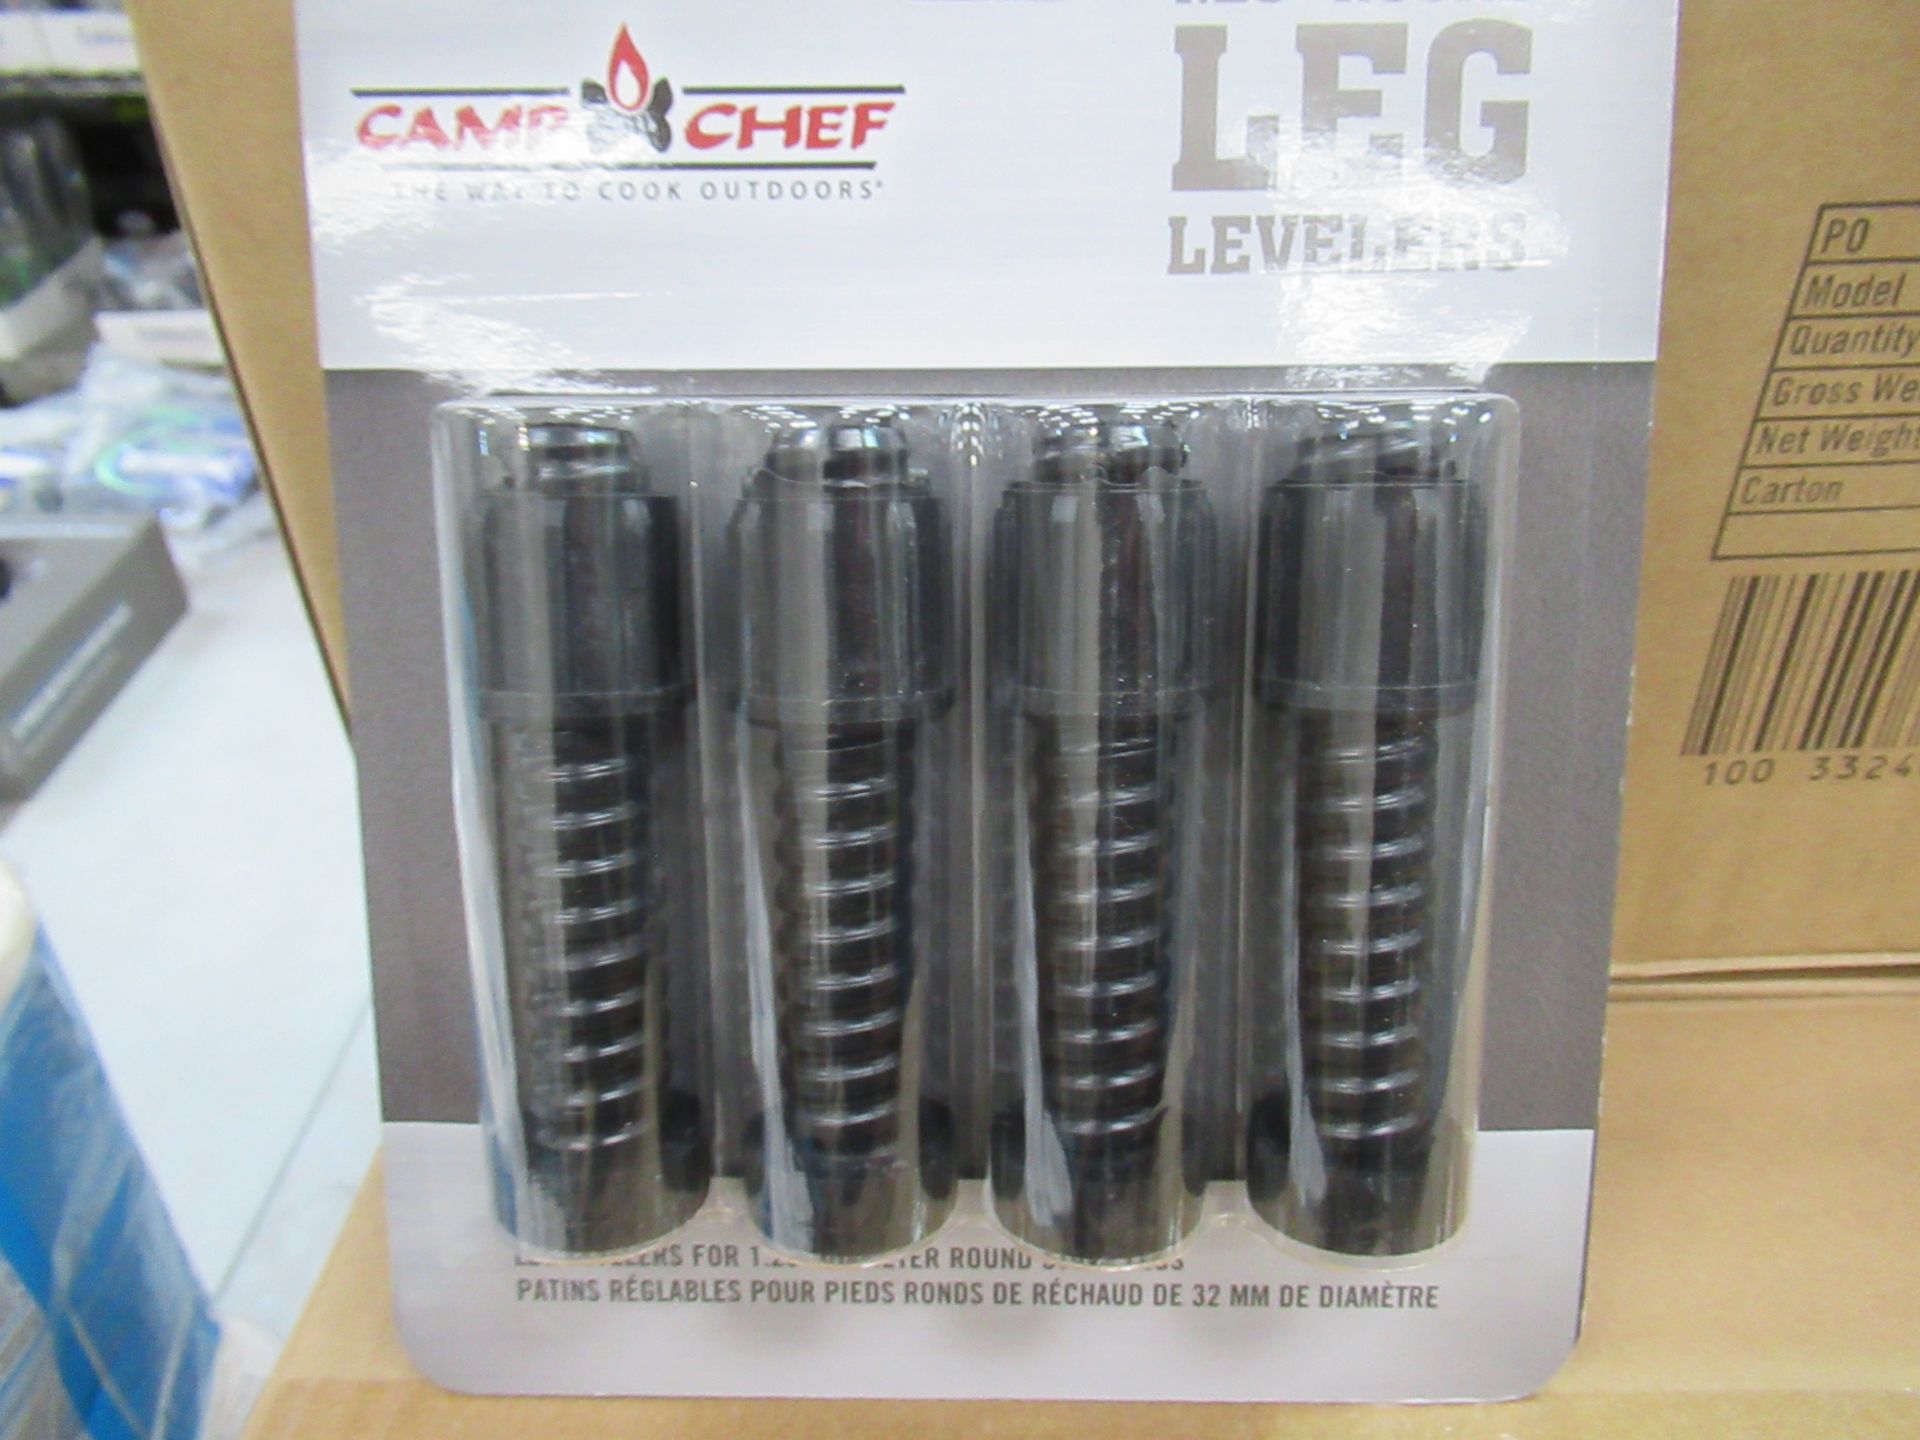 7 x Boxes of Camp Chef LEGX Round Leg Levelers (Please note, Viewing Strongly Recommended - Eddisons - Bild 3 aus 4